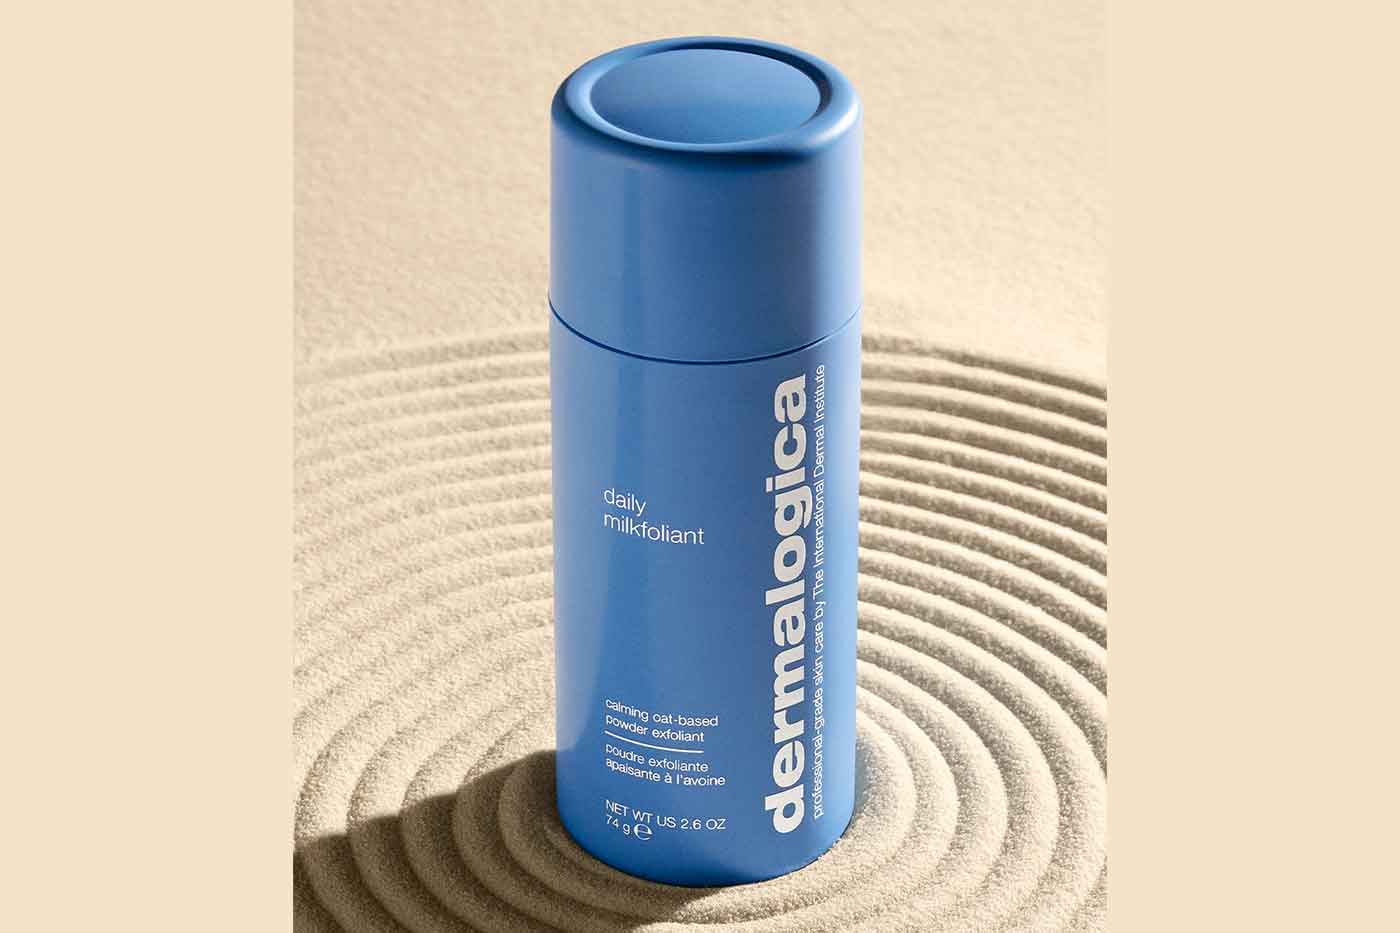 Dermalogica adds Milkfoliant to its cult exfoliant favourites